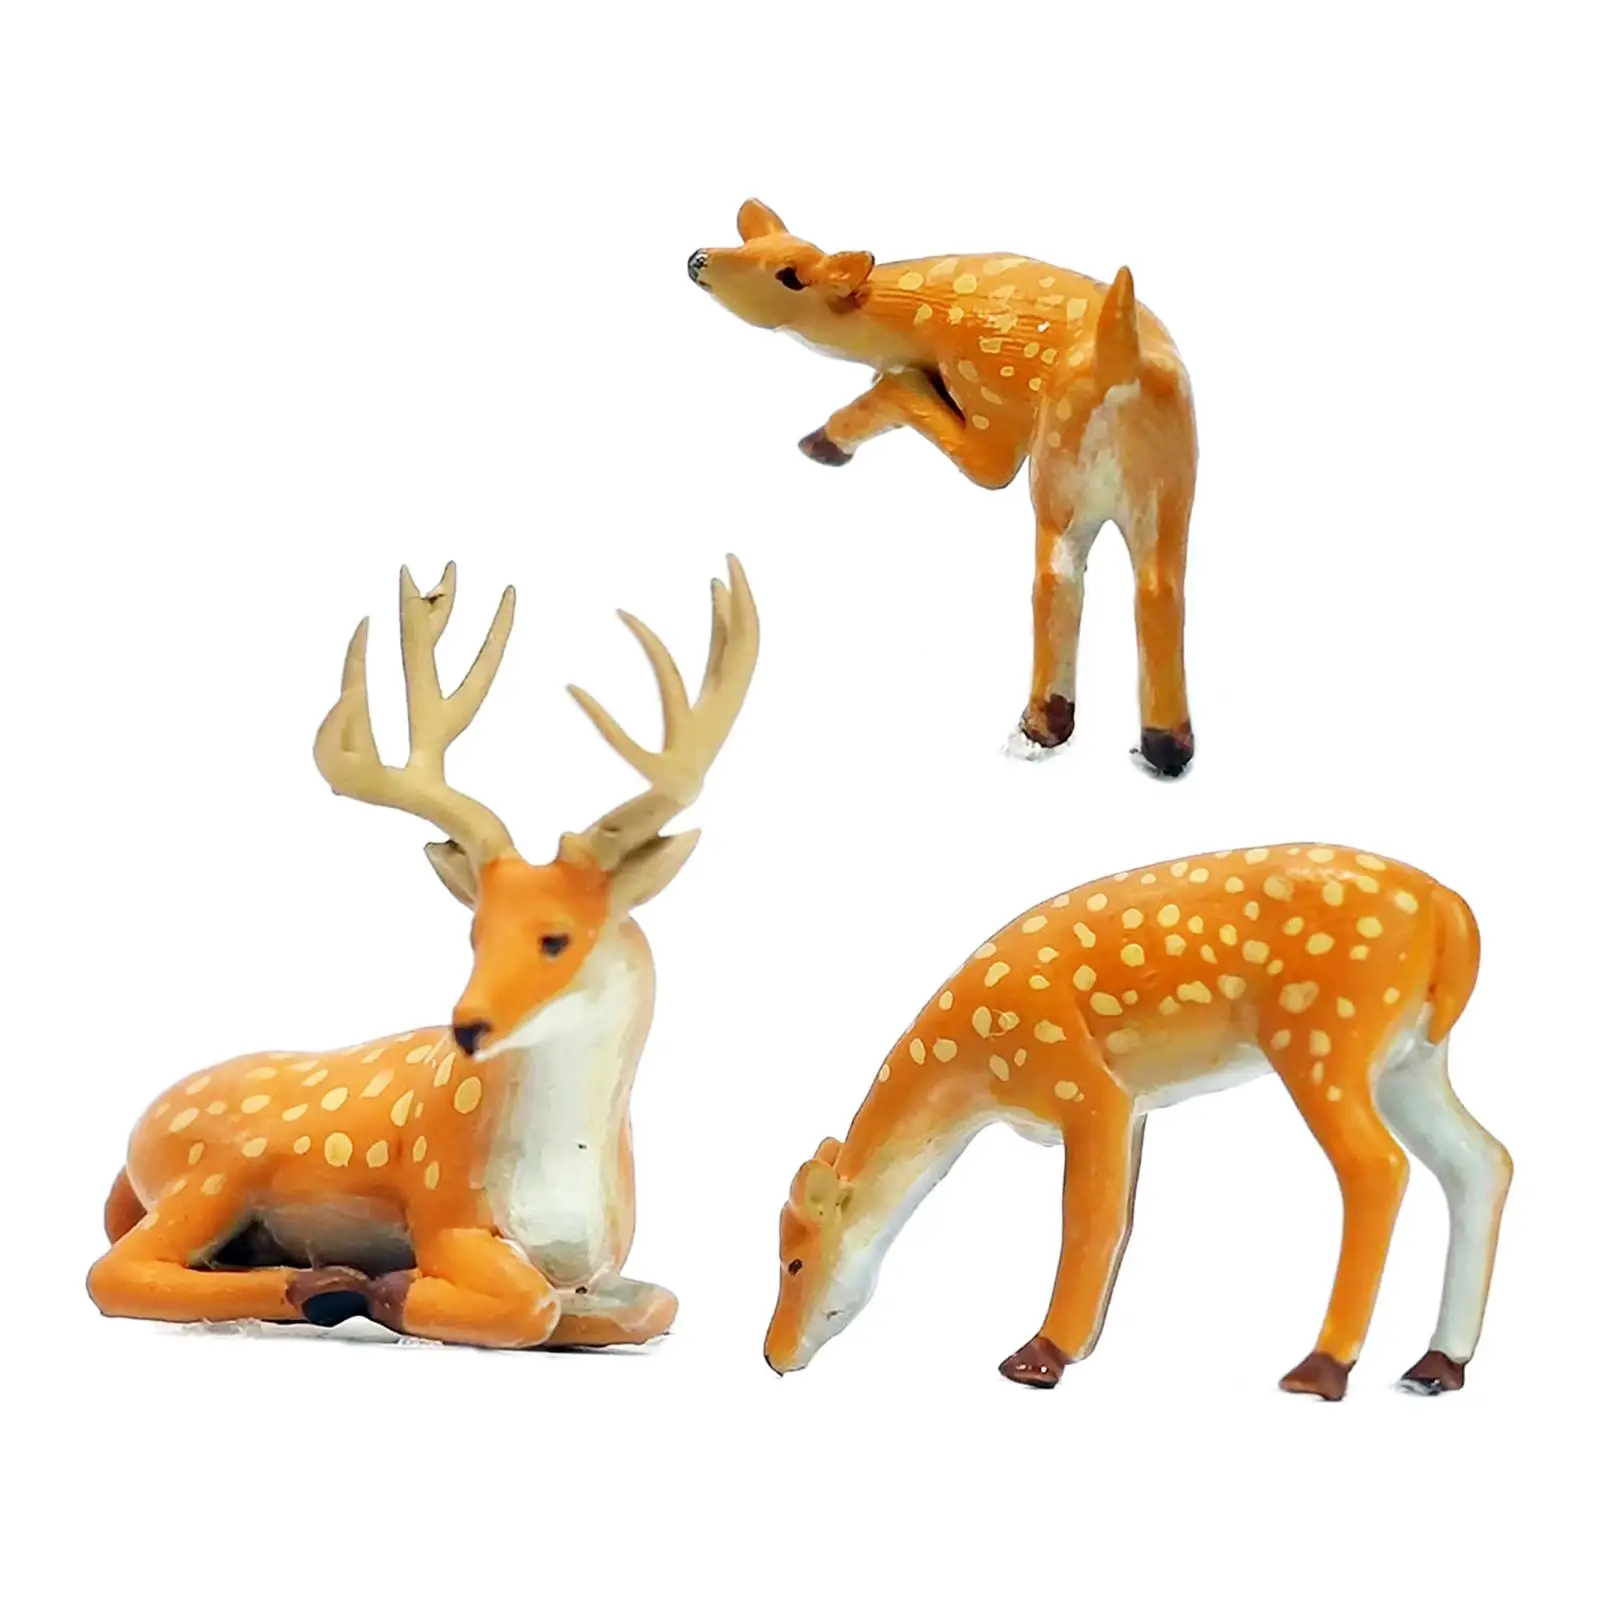 3Pcs 1:64 Forest Animal Deer Figures Resin for Diorama Layout Projects Decor